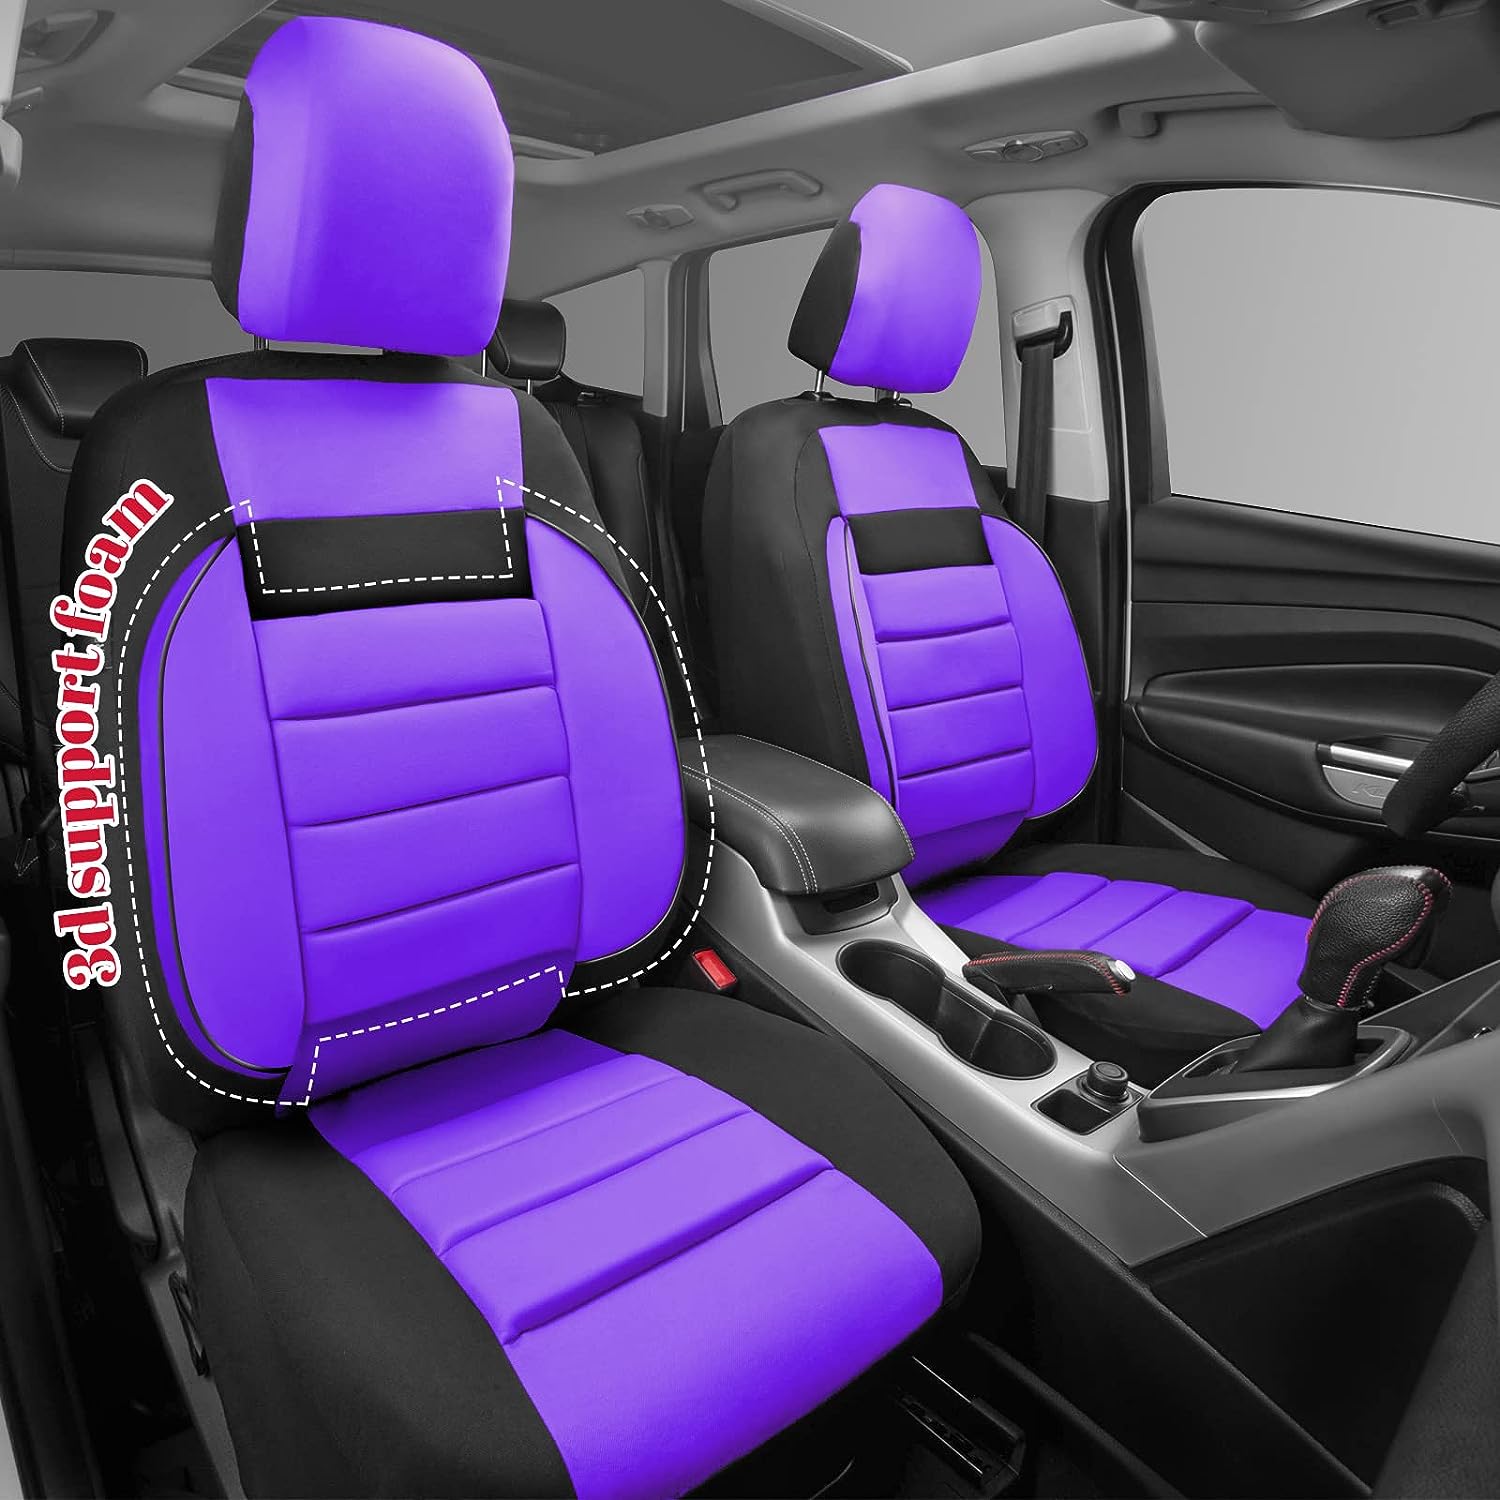 CAR PASS 6PCS Elegance Universal Fit Two Front Car Seat Covers Set ,Foam Back support,Airbag Compatible,Fit for suvs,sedans,cars(Black with Gray)